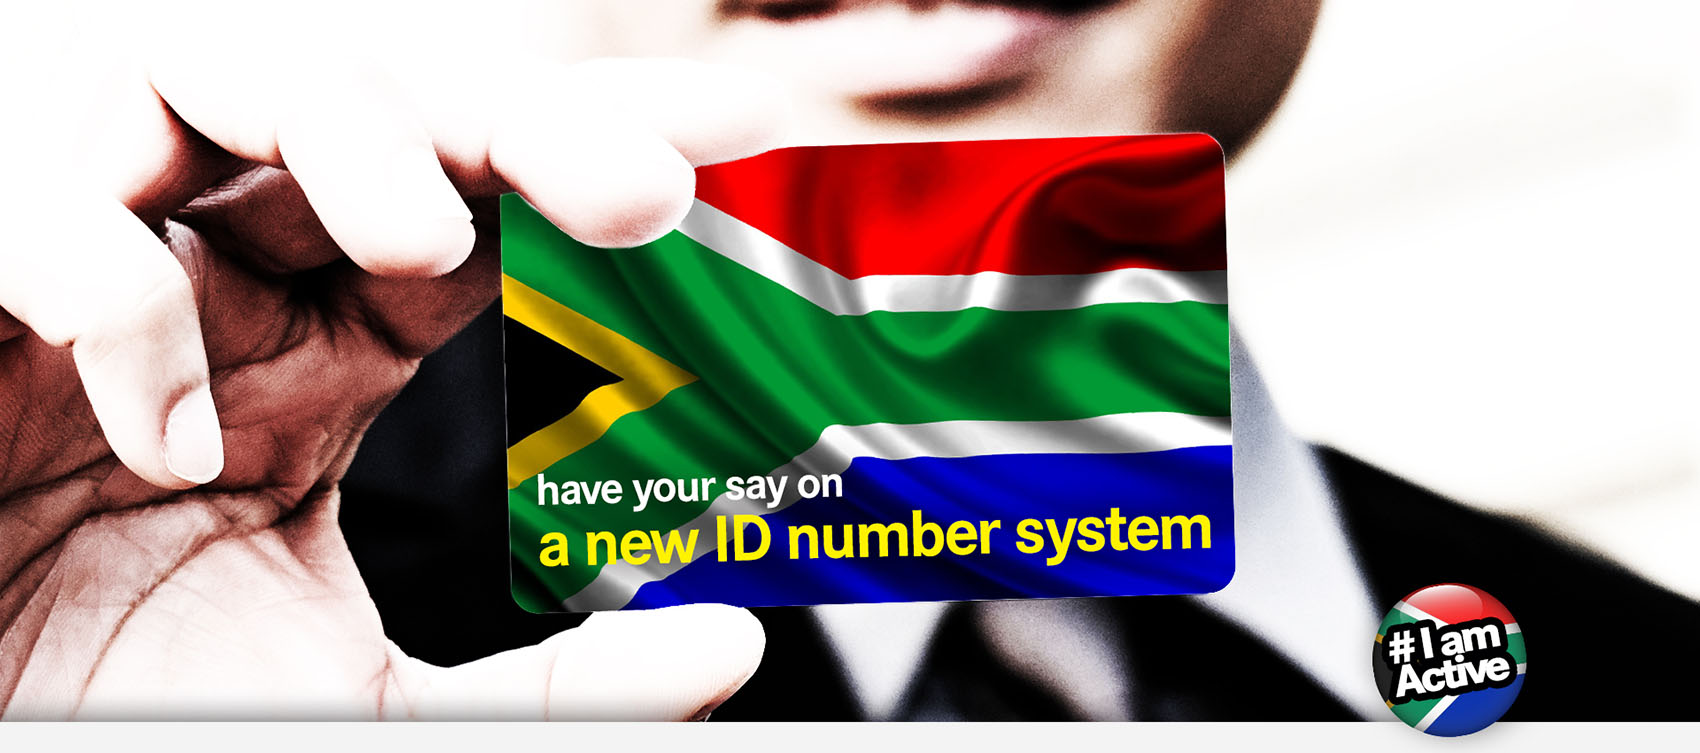 DearSA-new-ID-number-system